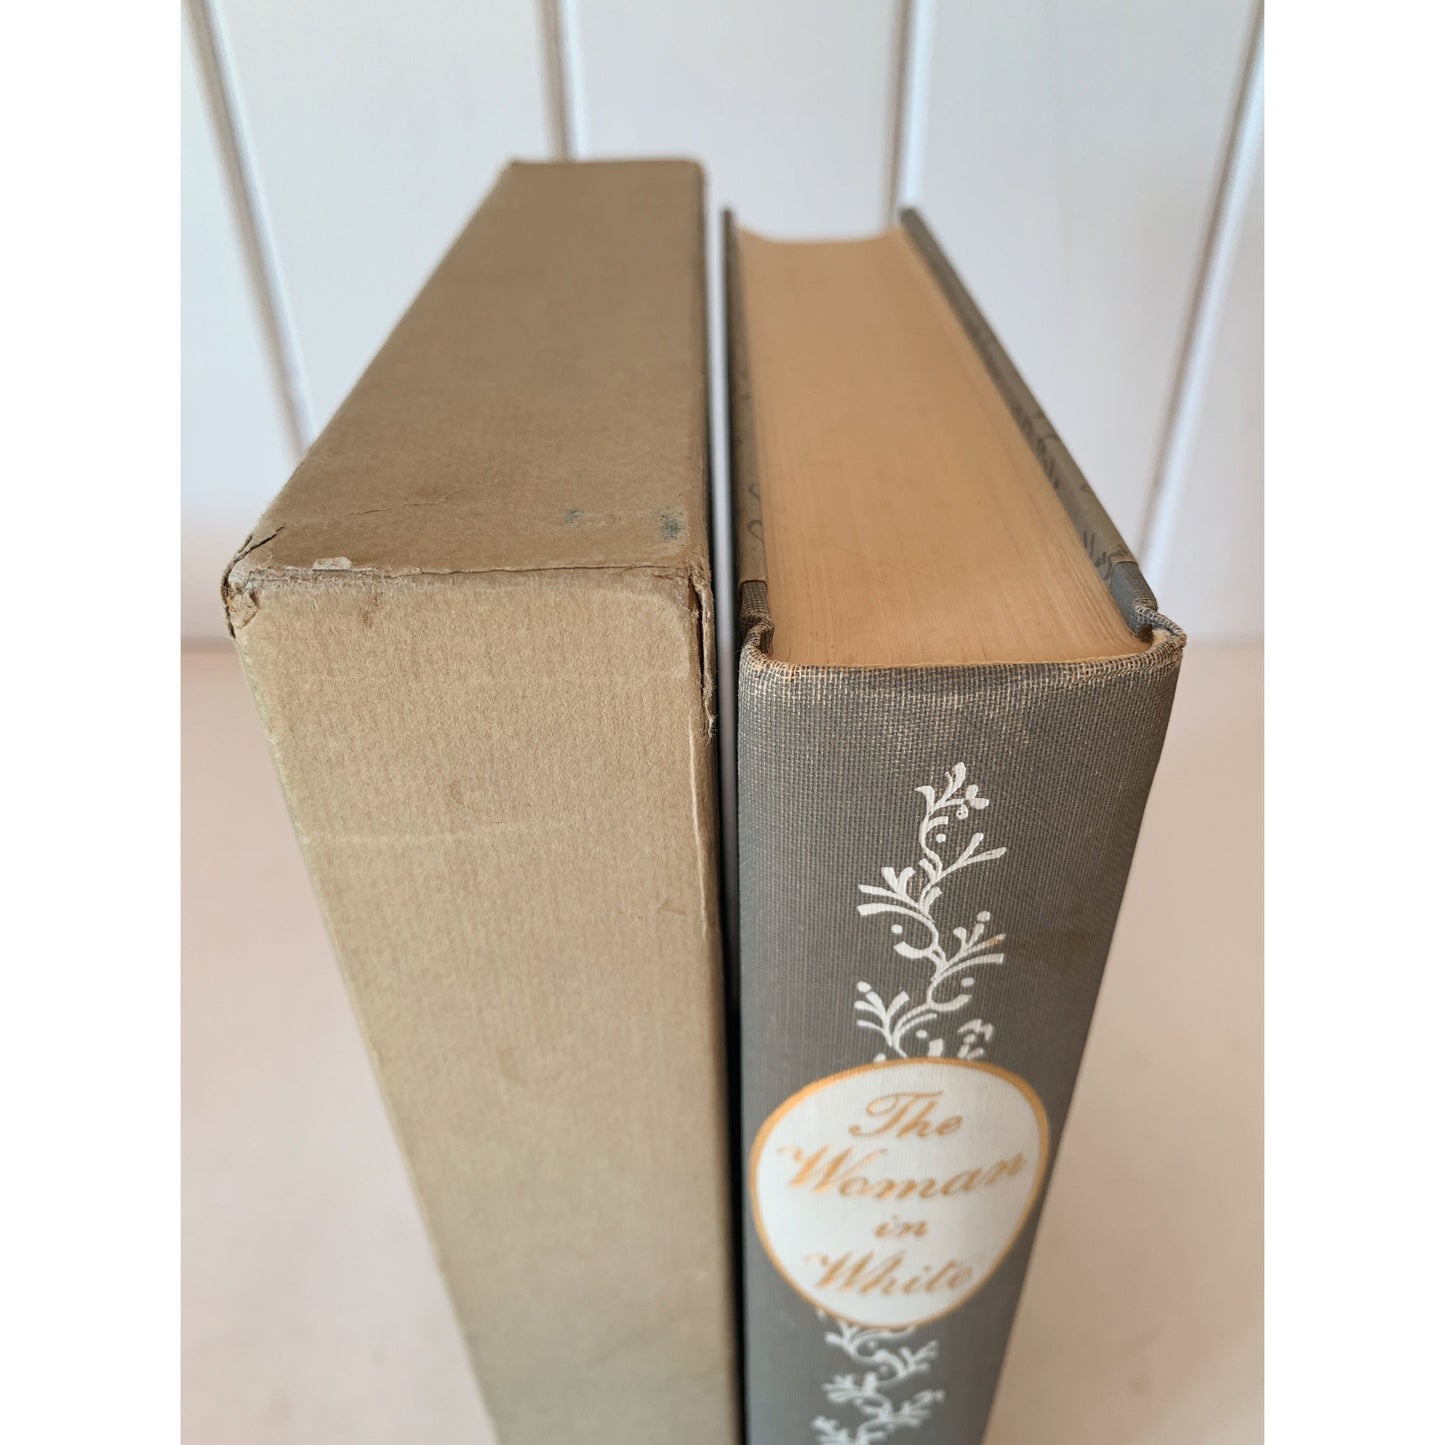 The Woman in White, Heritage Press Slipcased Edition, 1964